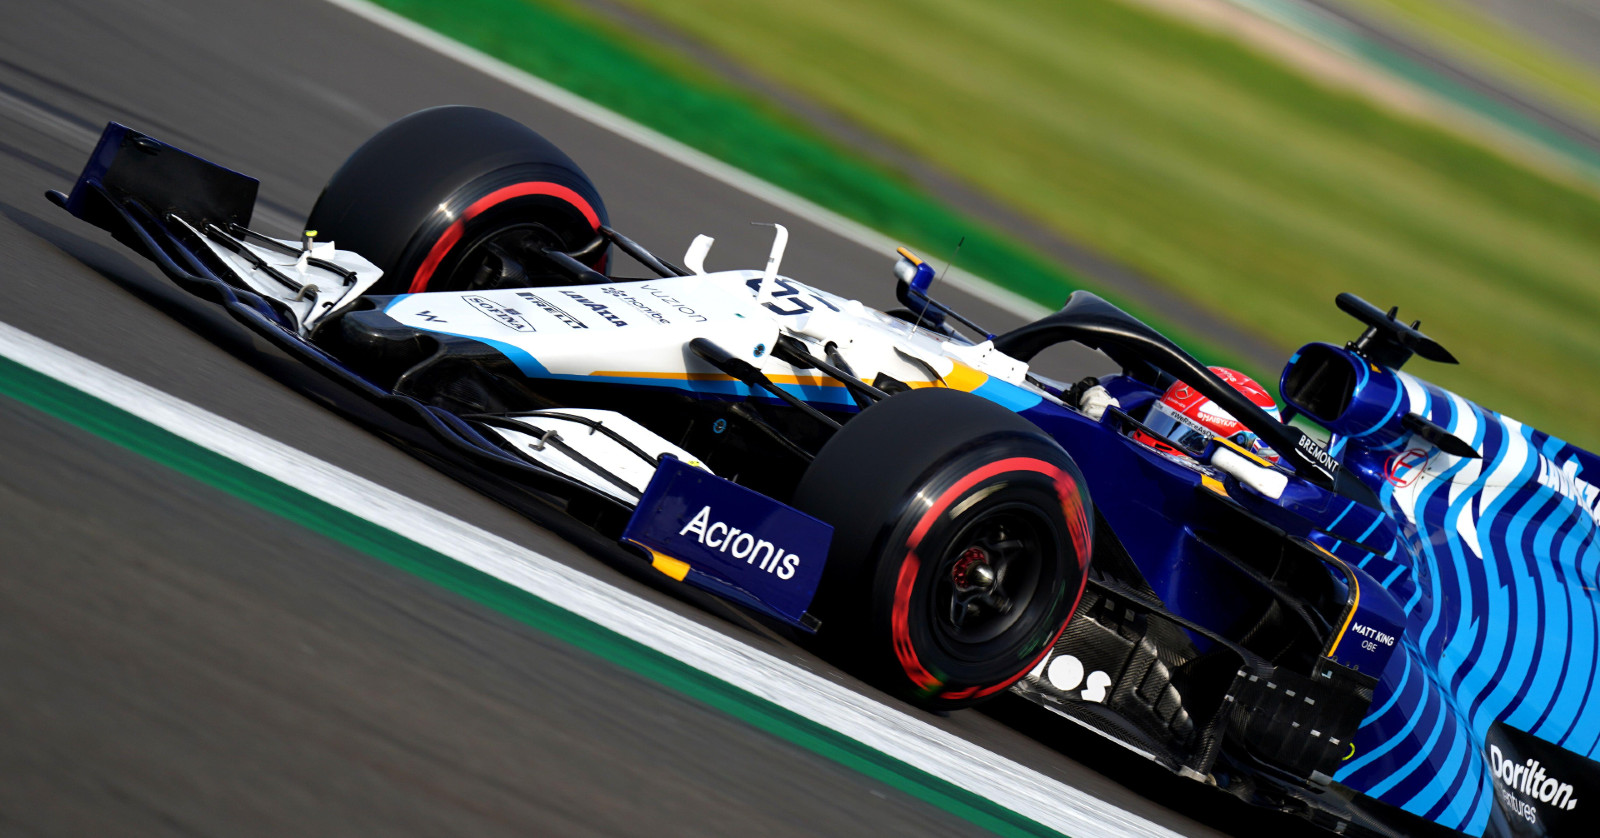 Williams' George Russell on track at the 2021 British Grand Prix. Silverstone, July 2021.